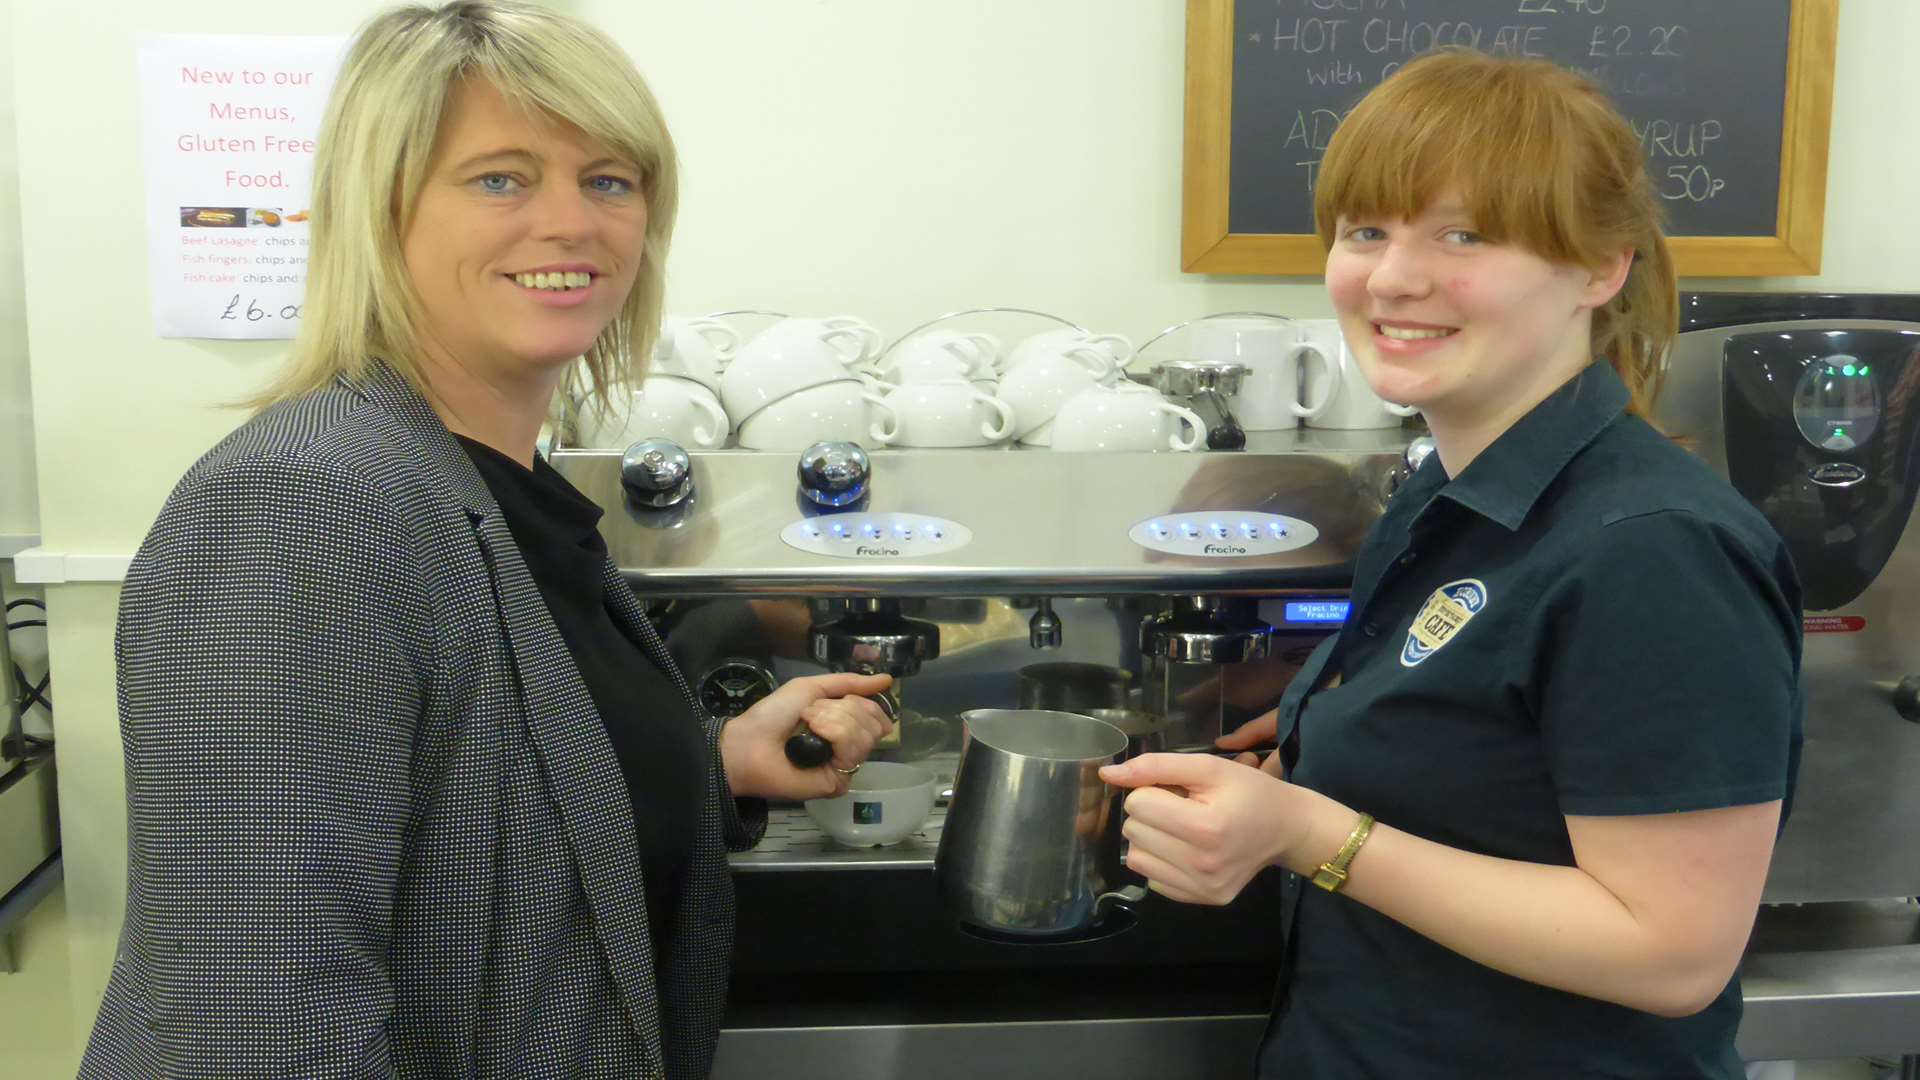 Mandy Bushell, Manager, and Emma Bennett at Just The Ticket Cafe whichEast Kent College is running inside the Hornby Visitor Centre.